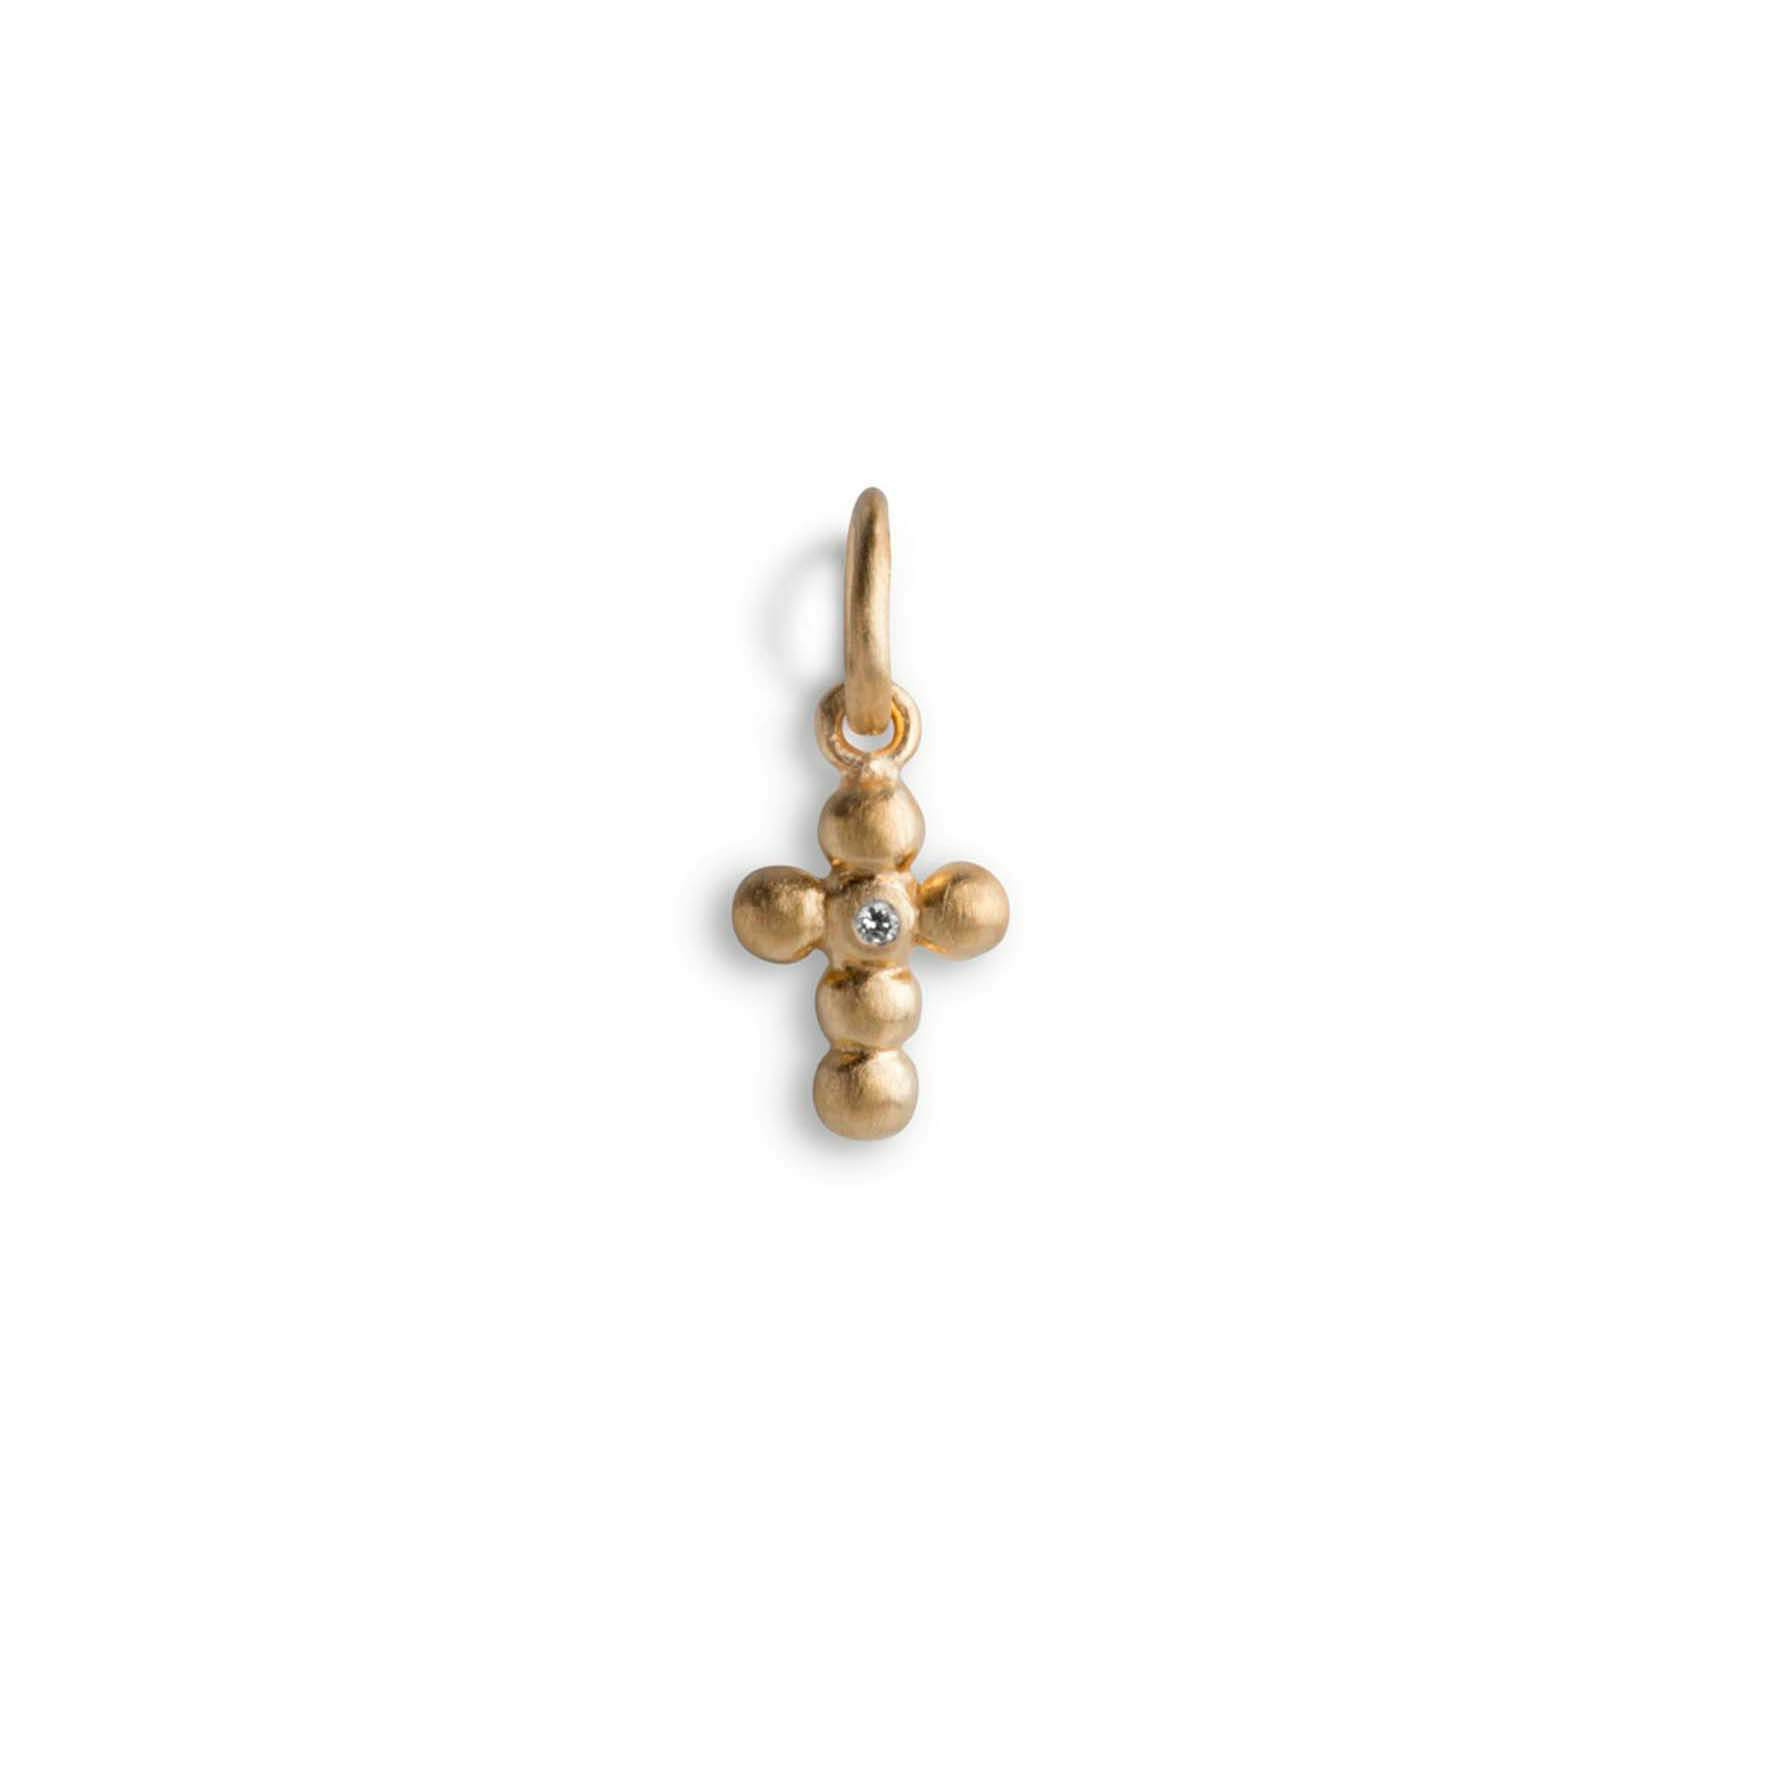 Cross Pendant With 1 Diamond from Jane Kønig in Goldplated-Silver Sterling 925